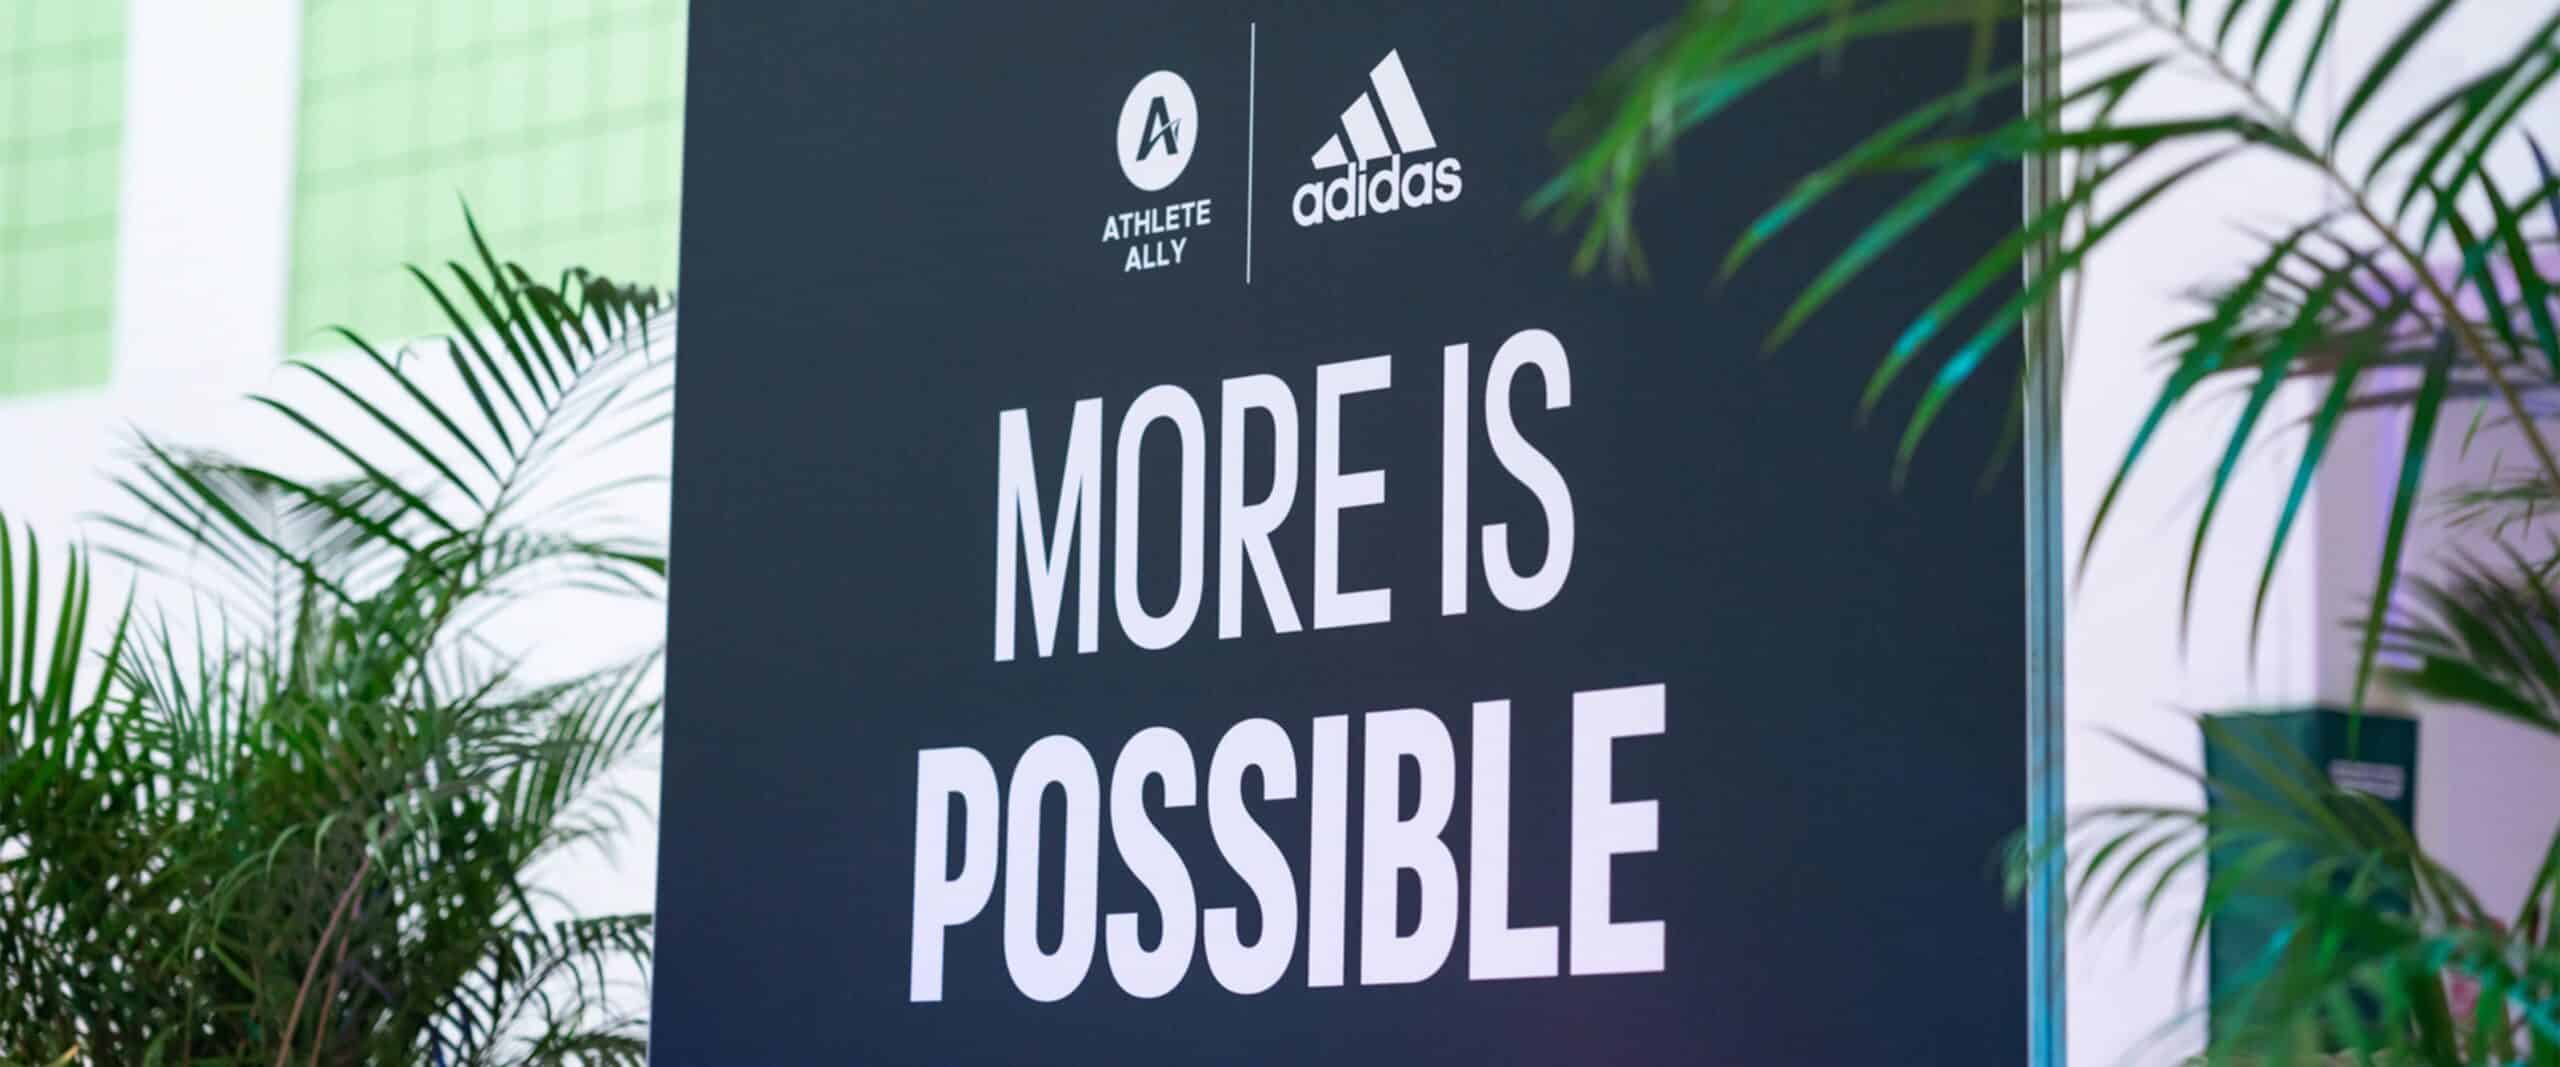 Adidas more is possible logo scaled